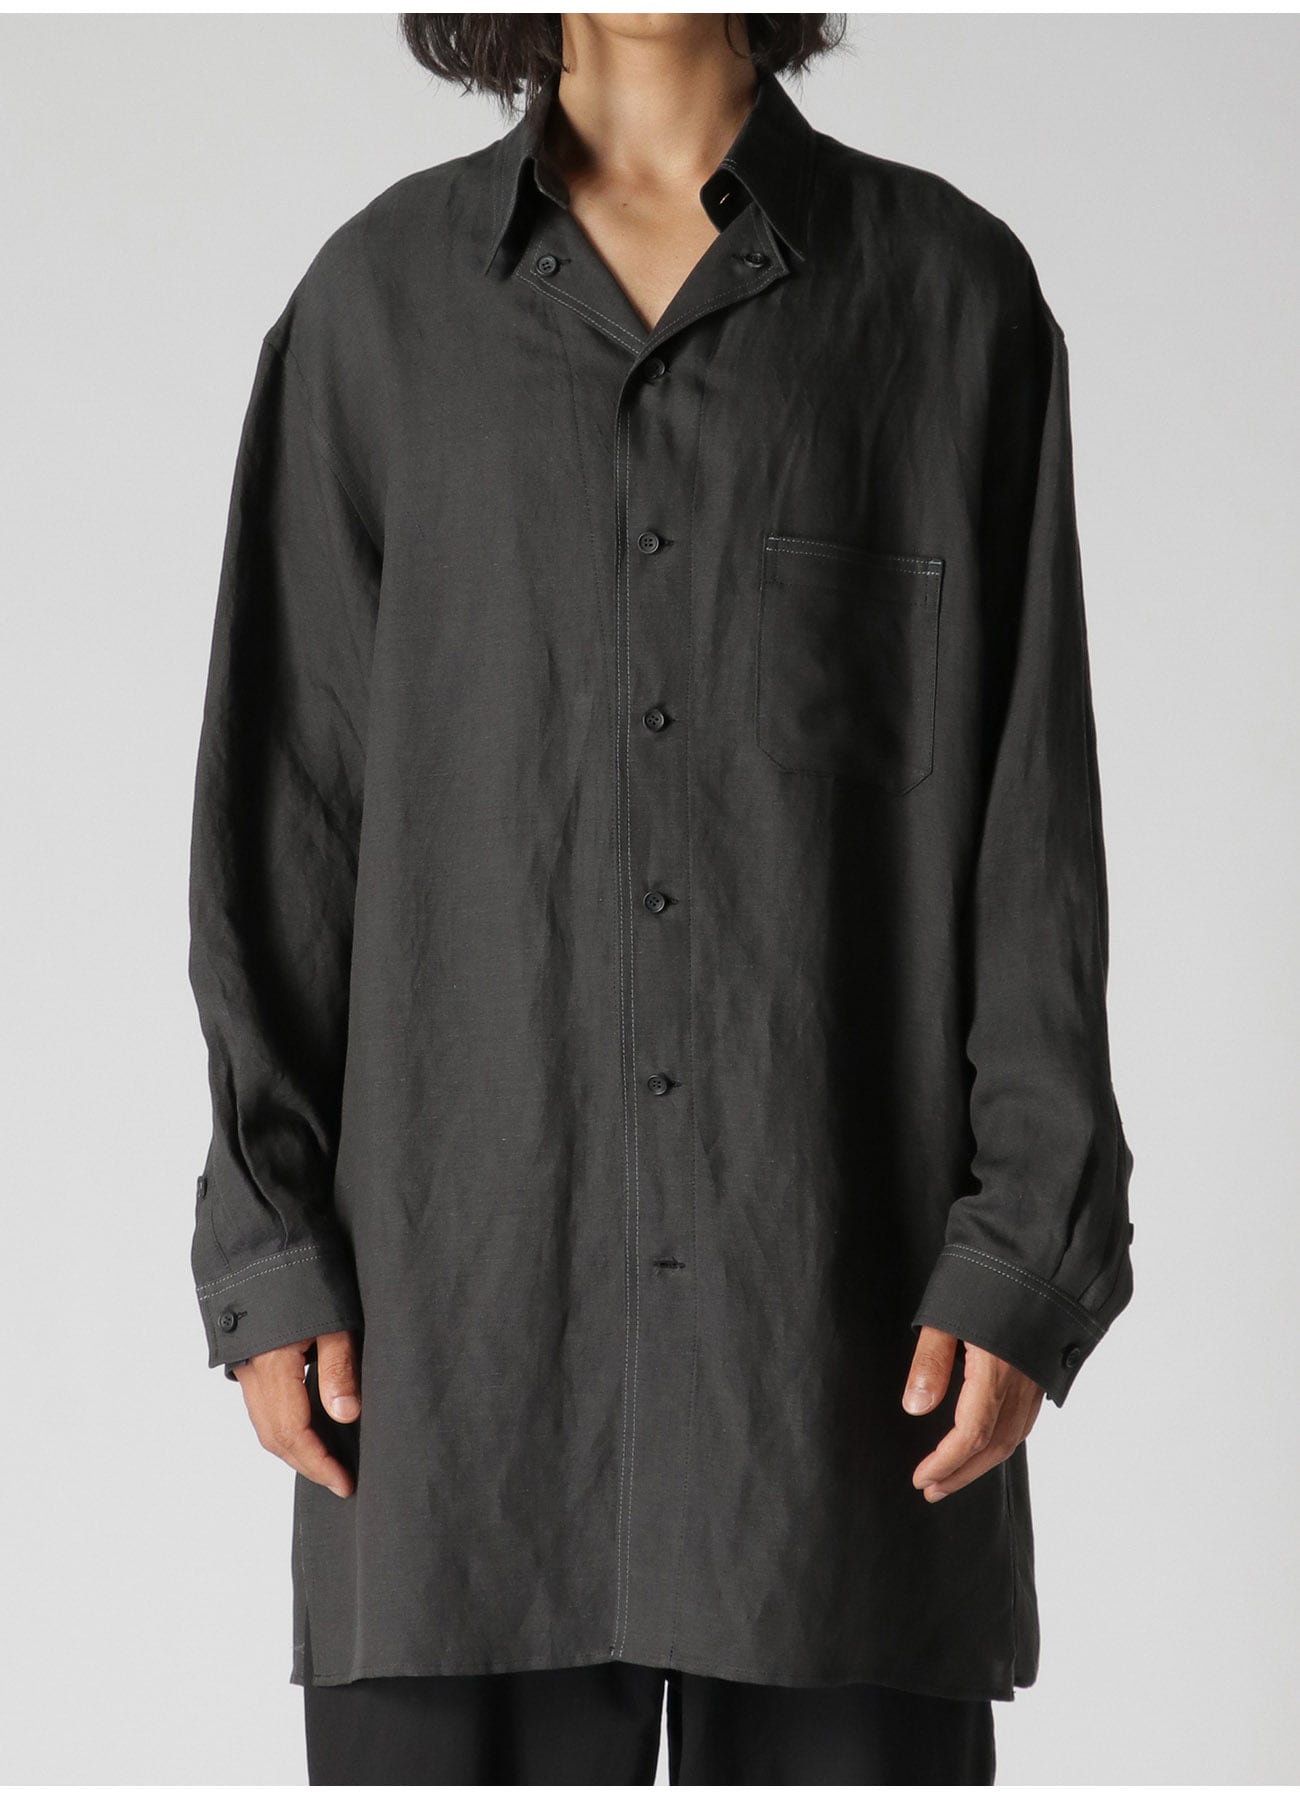 LYOCELL LINEN TWILL SHIRT WITH DESIGN COLLAR AND COLOR STITCH